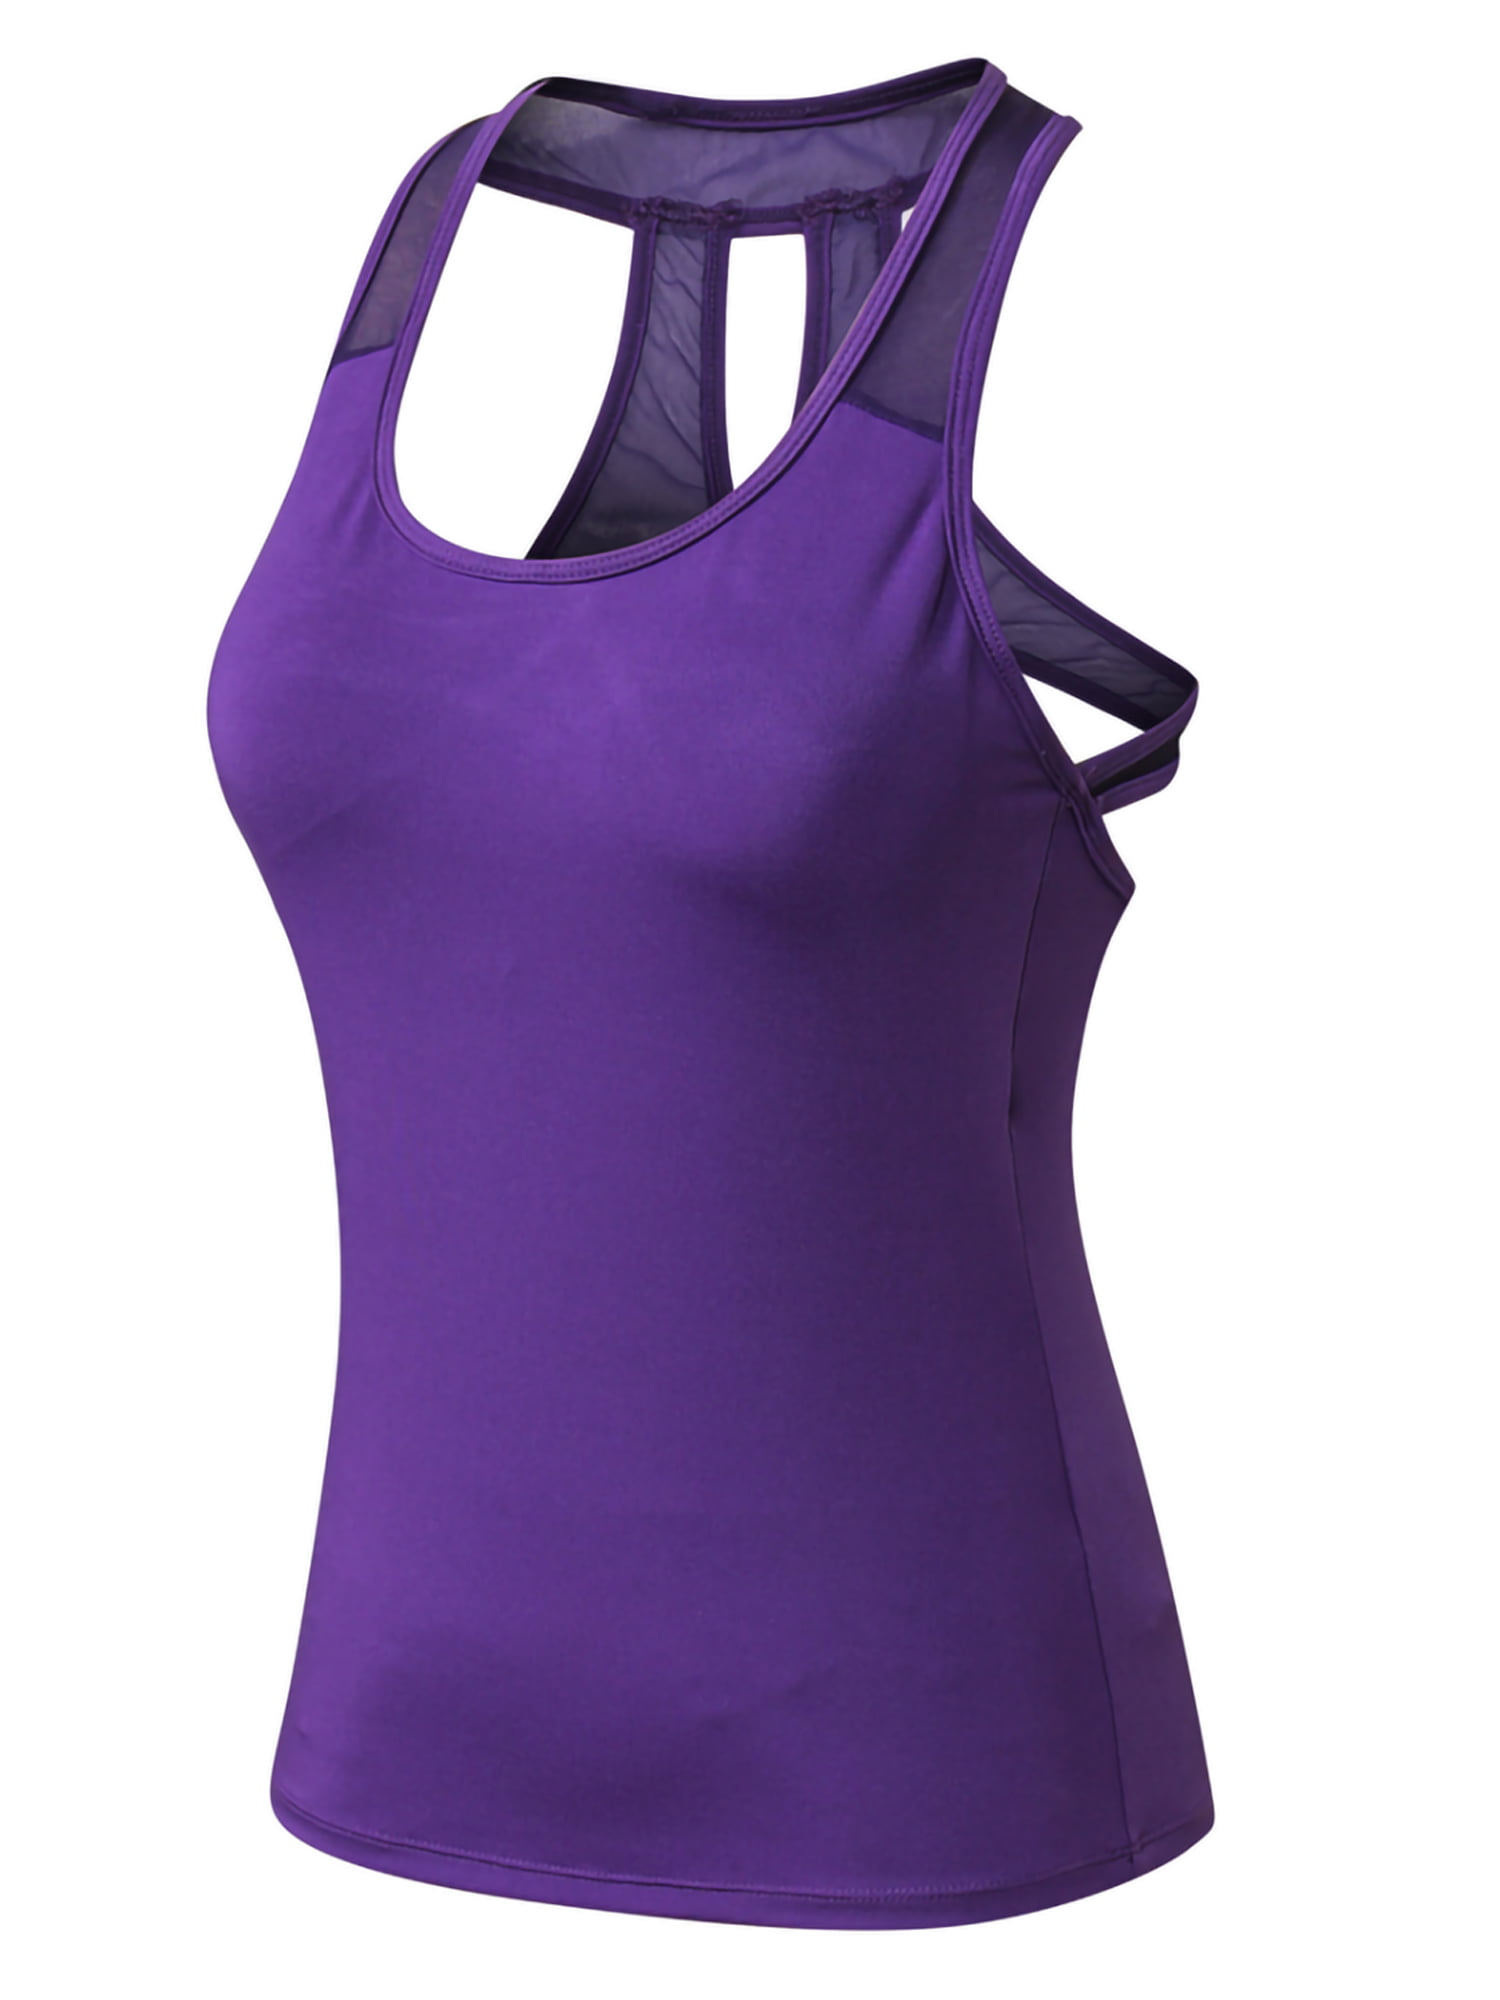 VUTRU Workout Tank Tops Built in Bra Strappy Athletic Yoga Tops Athletic Workout Clothes 2 in 1 Tanks for Women